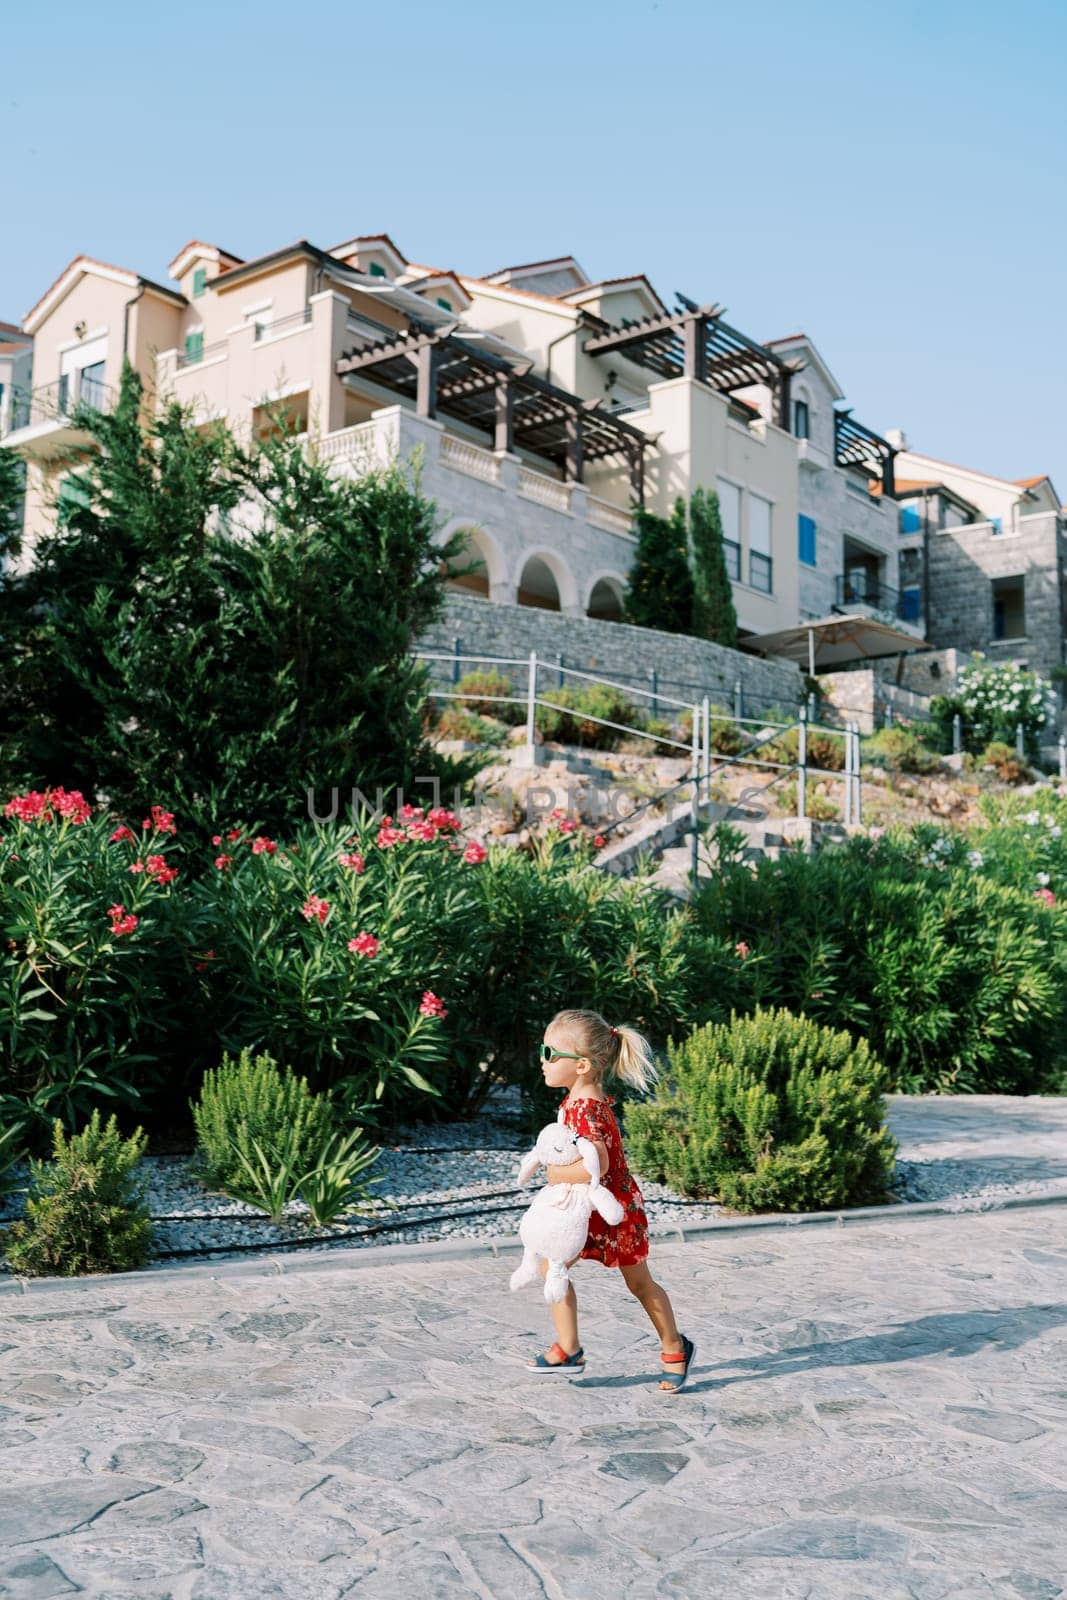 Little girl walks along a paved road in a flowering garden with stairs to a residential building with terraces. High quality photo